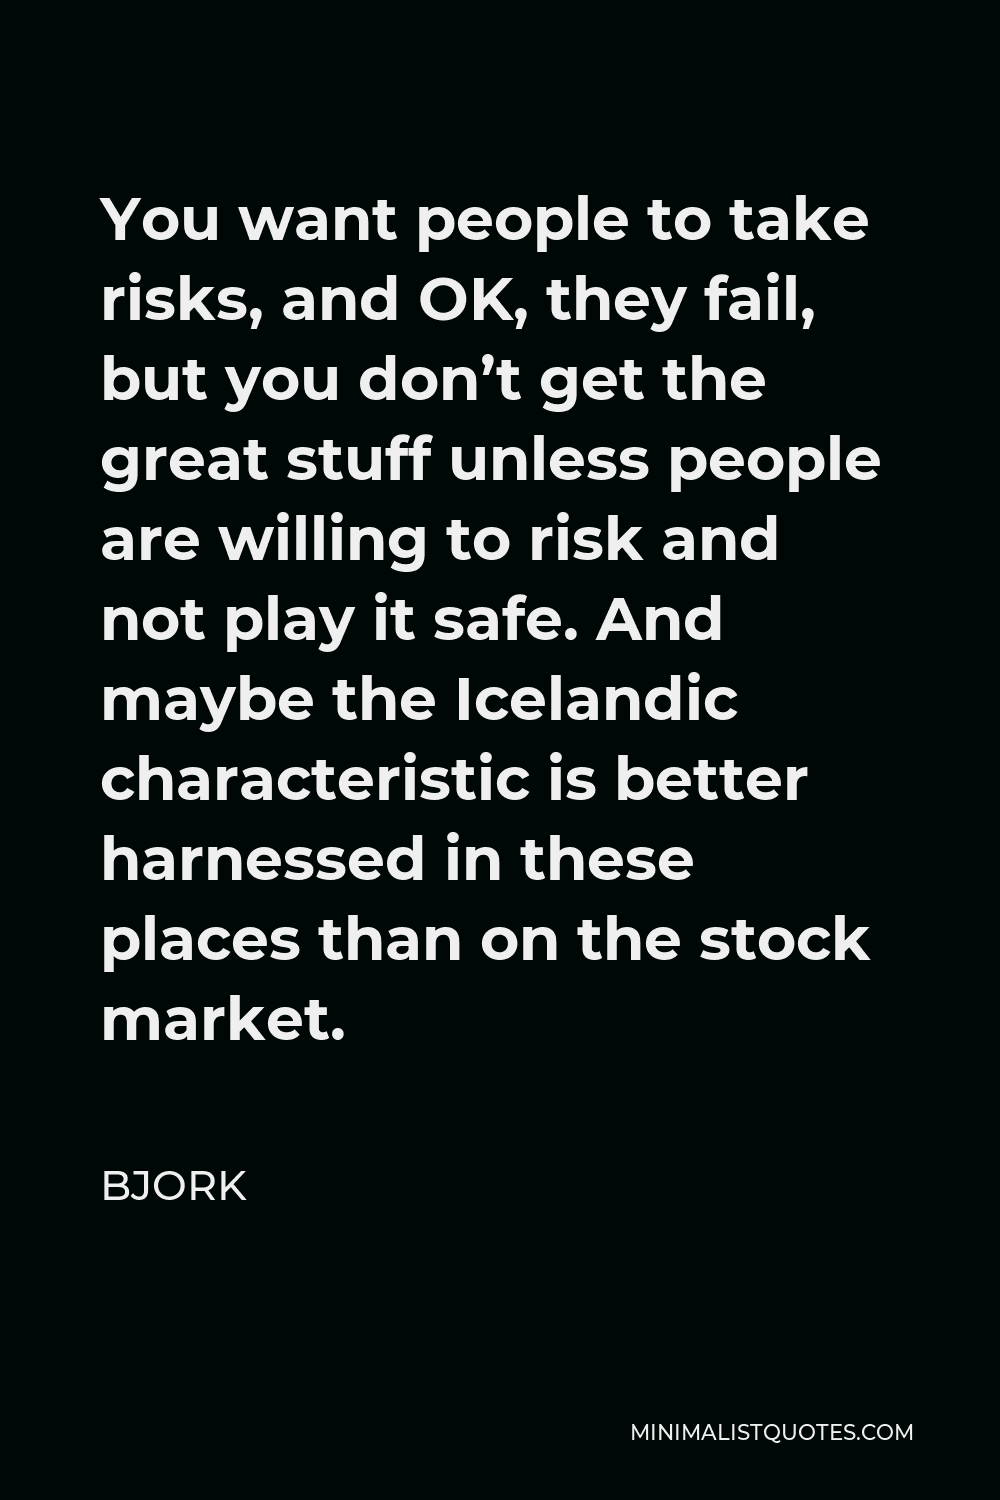 Bjork Quote - You want people to take risks, and OK, they fail, but you don’t get the great stuff unless people are willing to risk and not play it safe. And maybe the Icelandic characteristic is better harnessed in these places than on the stock market.